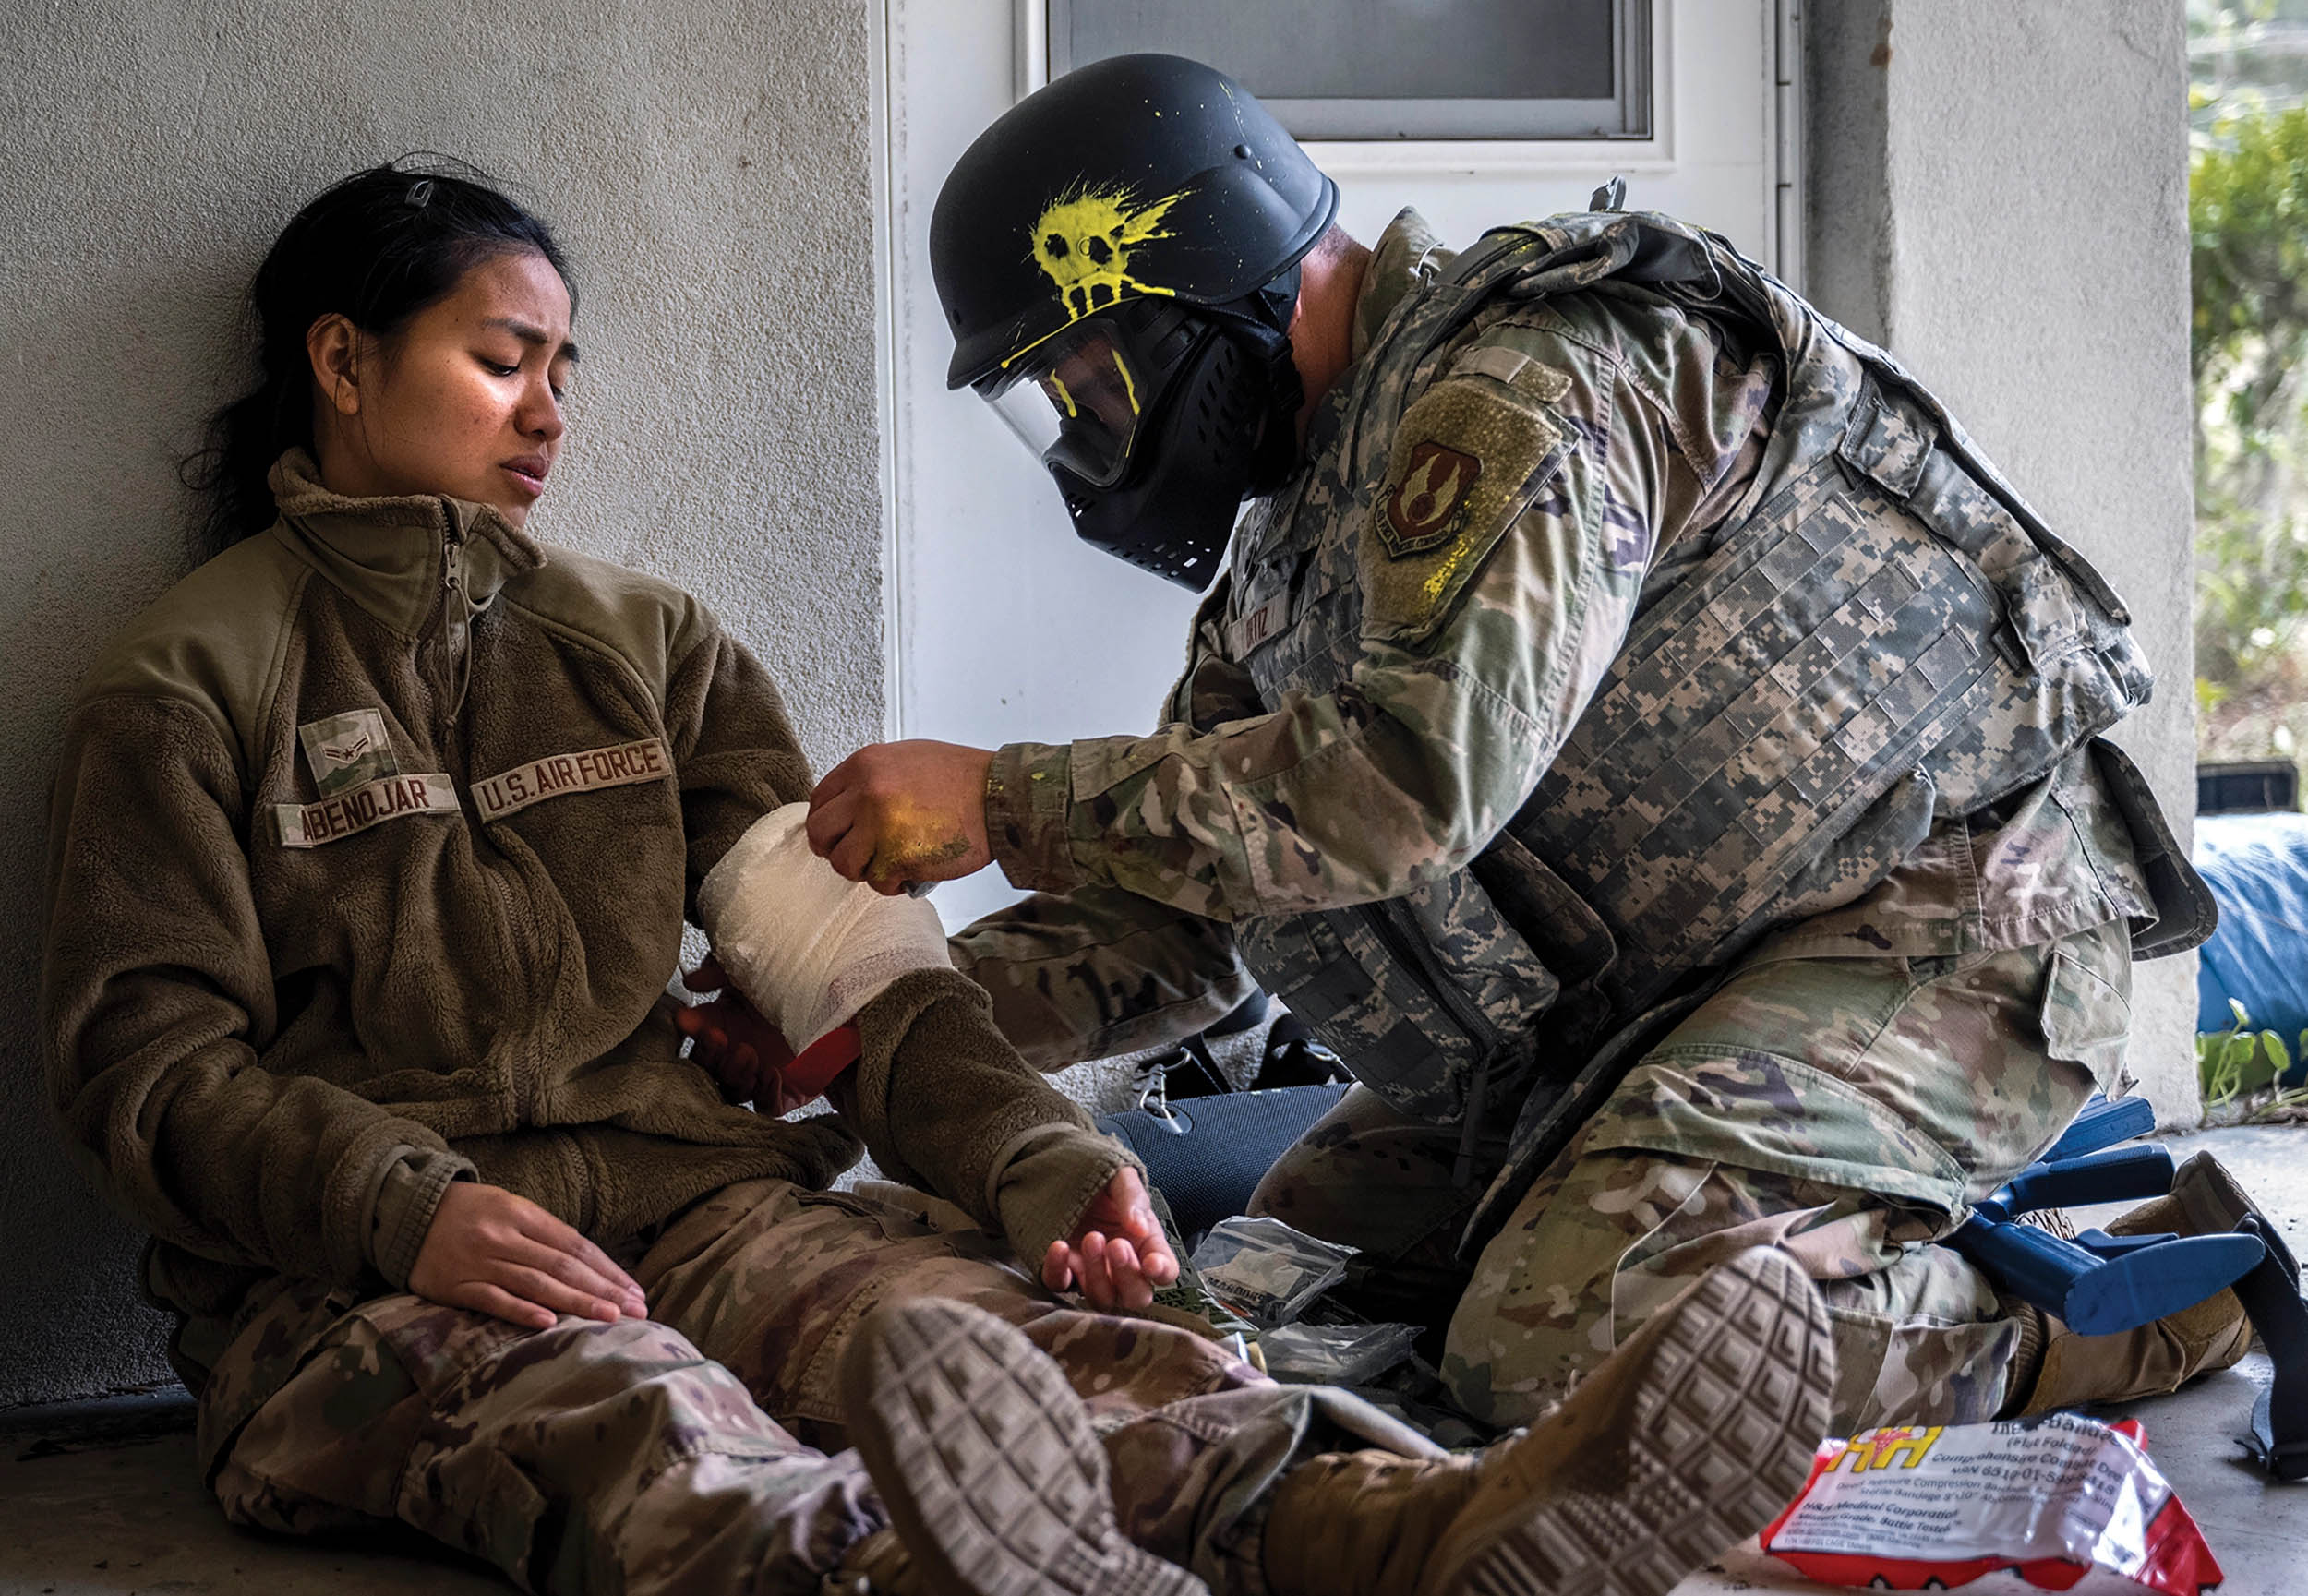 Airman with 96th Medical Group provides aid to simulated victim during scenario for Tactical Combat Casualty Care training, November 17, 2022, at Eglin Air Force Base, Florida (U.S. Air Force/Samuel King, Jr.)